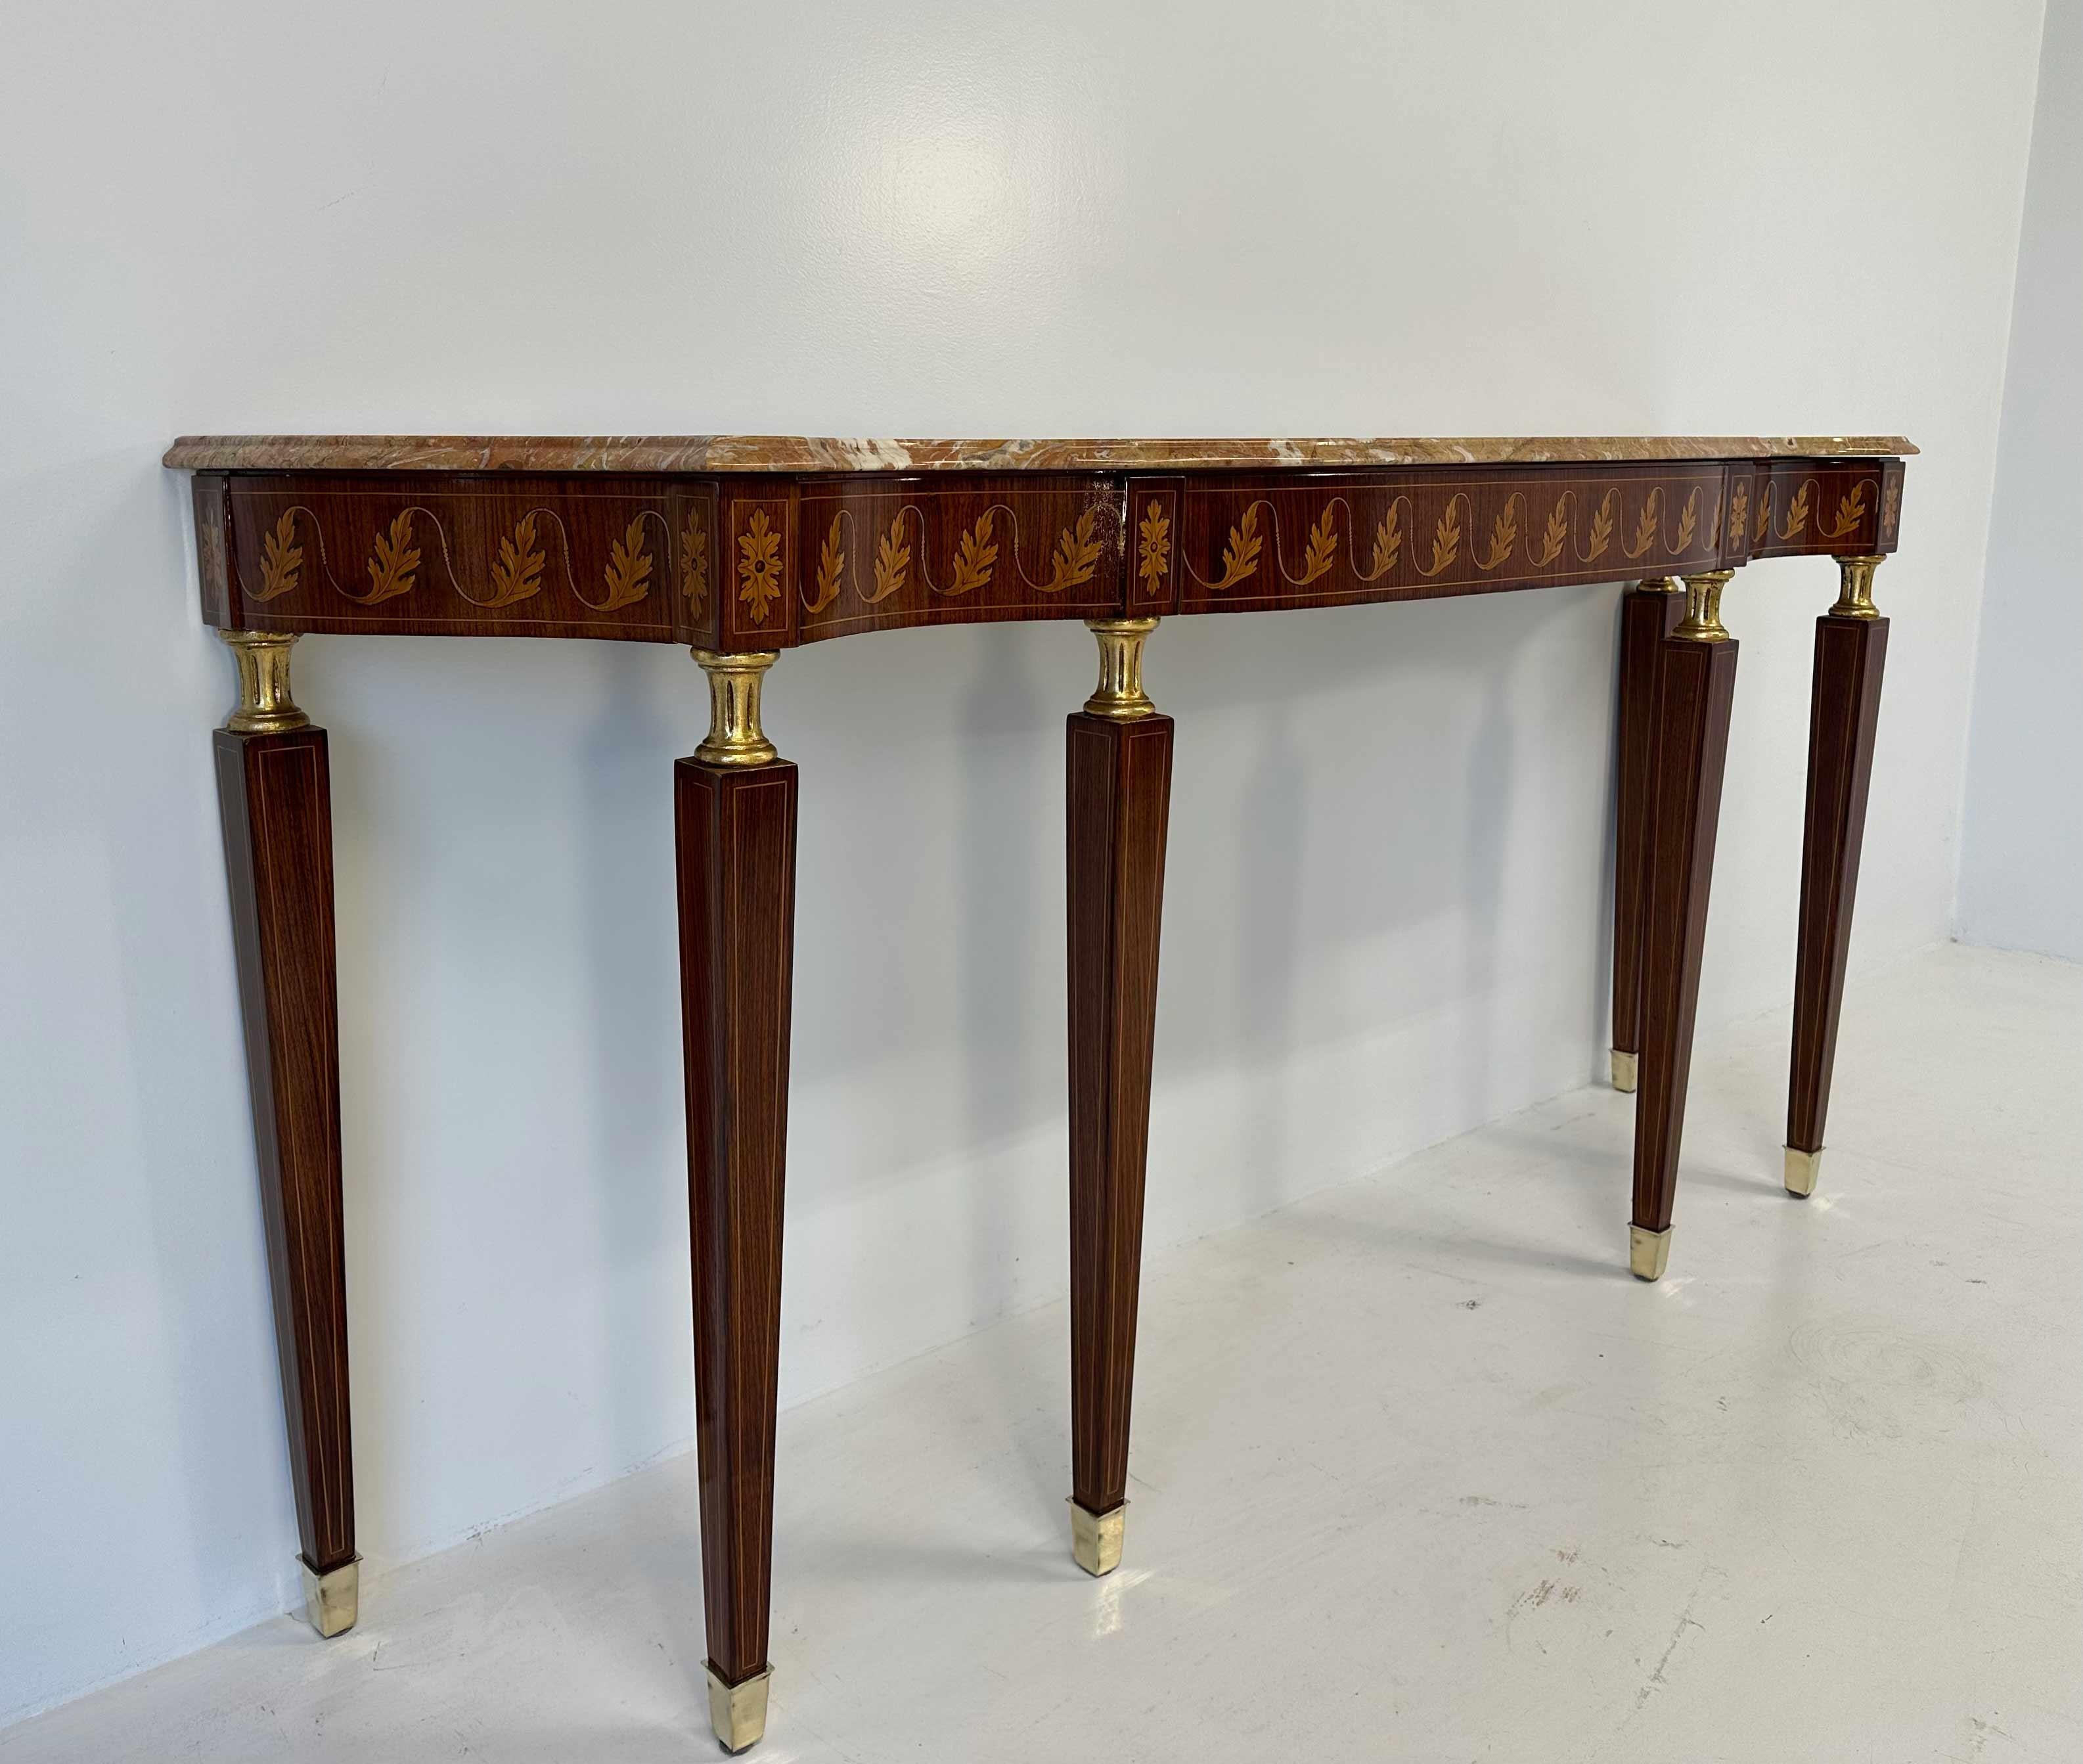 Italian Art Deco Marble and Inlaid Wood Console, Attr. to Paolo Buffa, 1950s For Sale 1